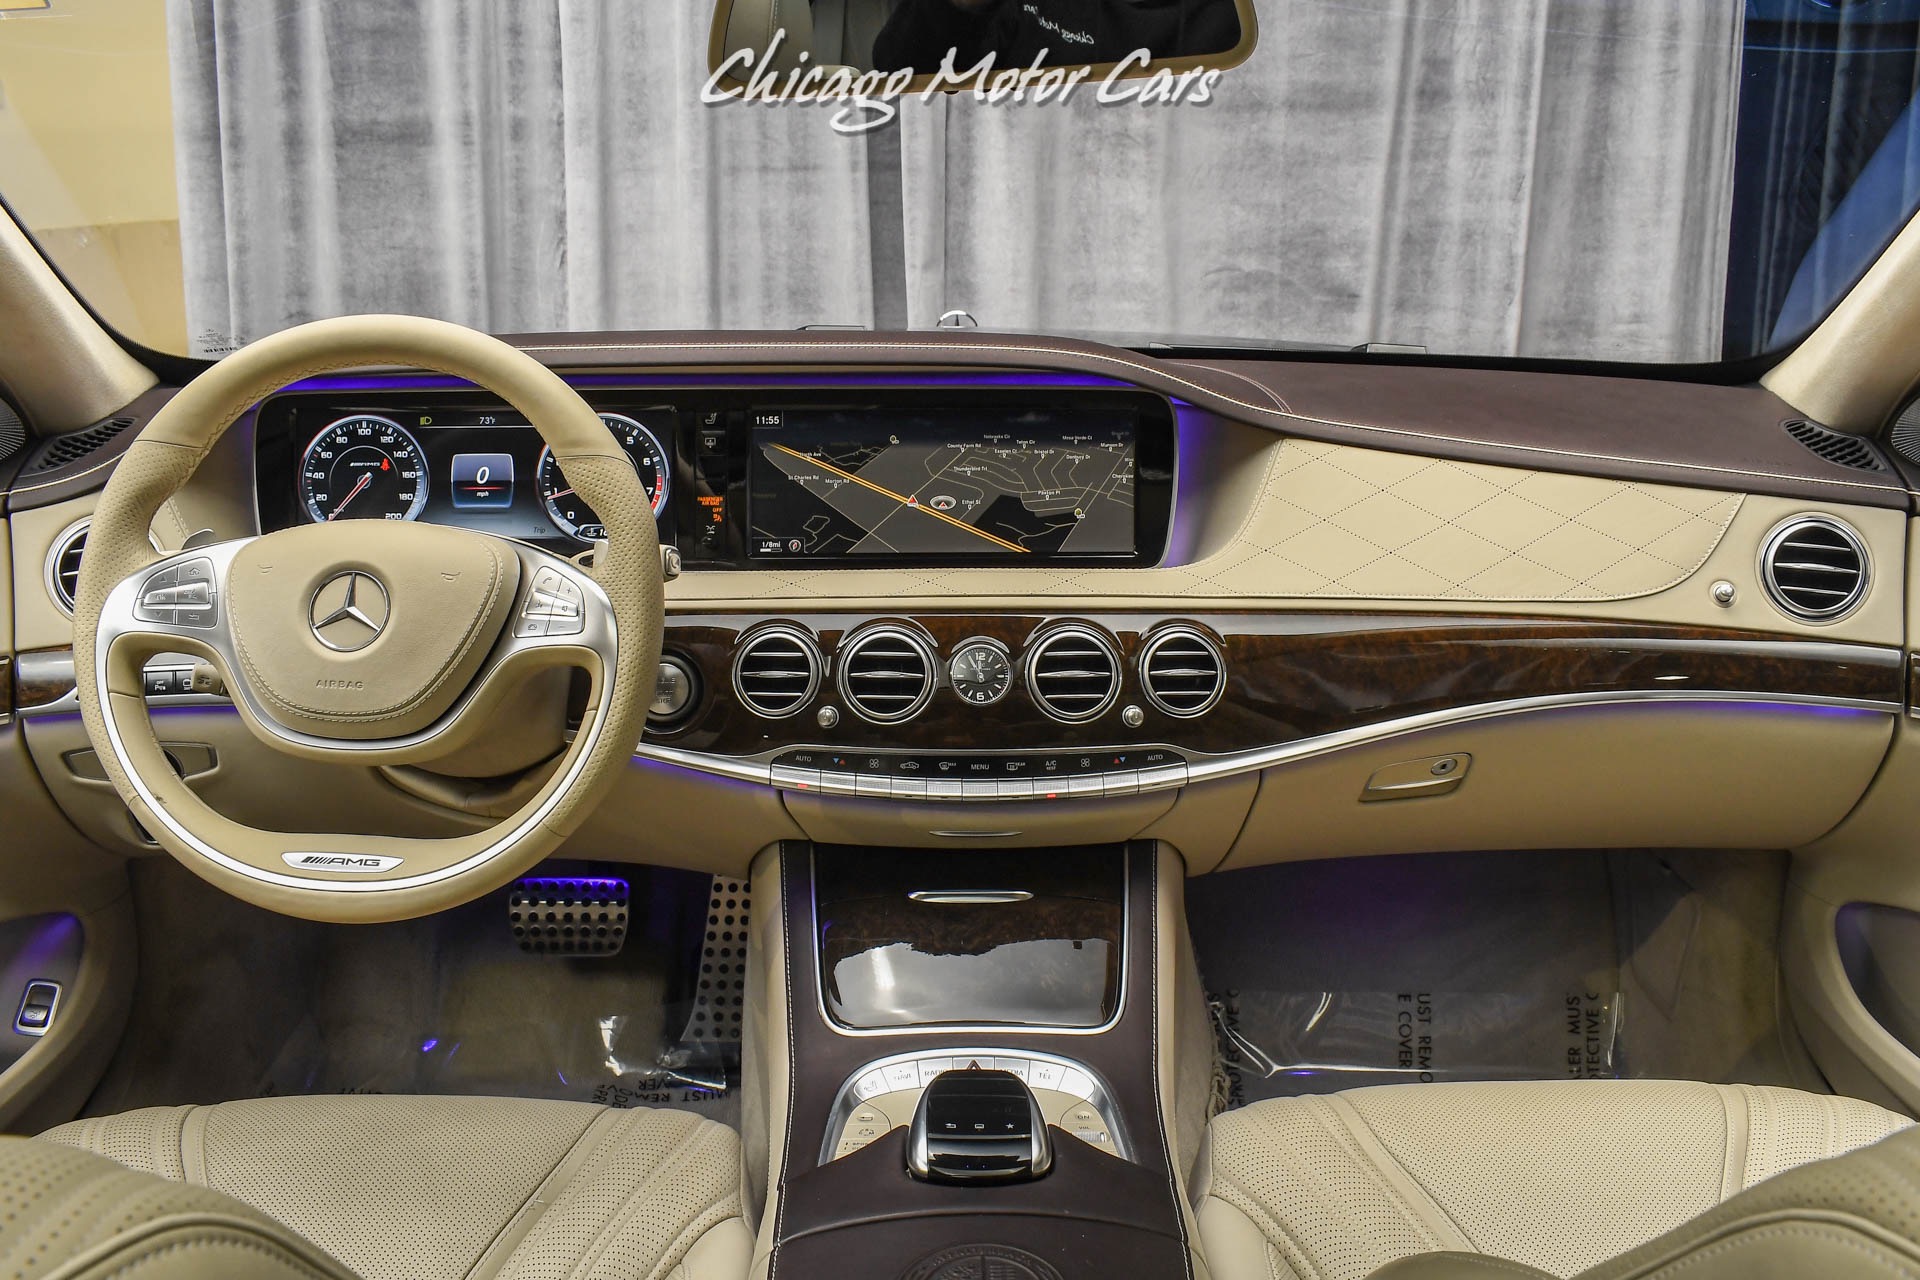 Used-2015-Mercedes-Benz-S63-AMG-4Matic-Sedan-Executive-Rear-Seat-Pack-Burmester-High-End-Audio-LOADED